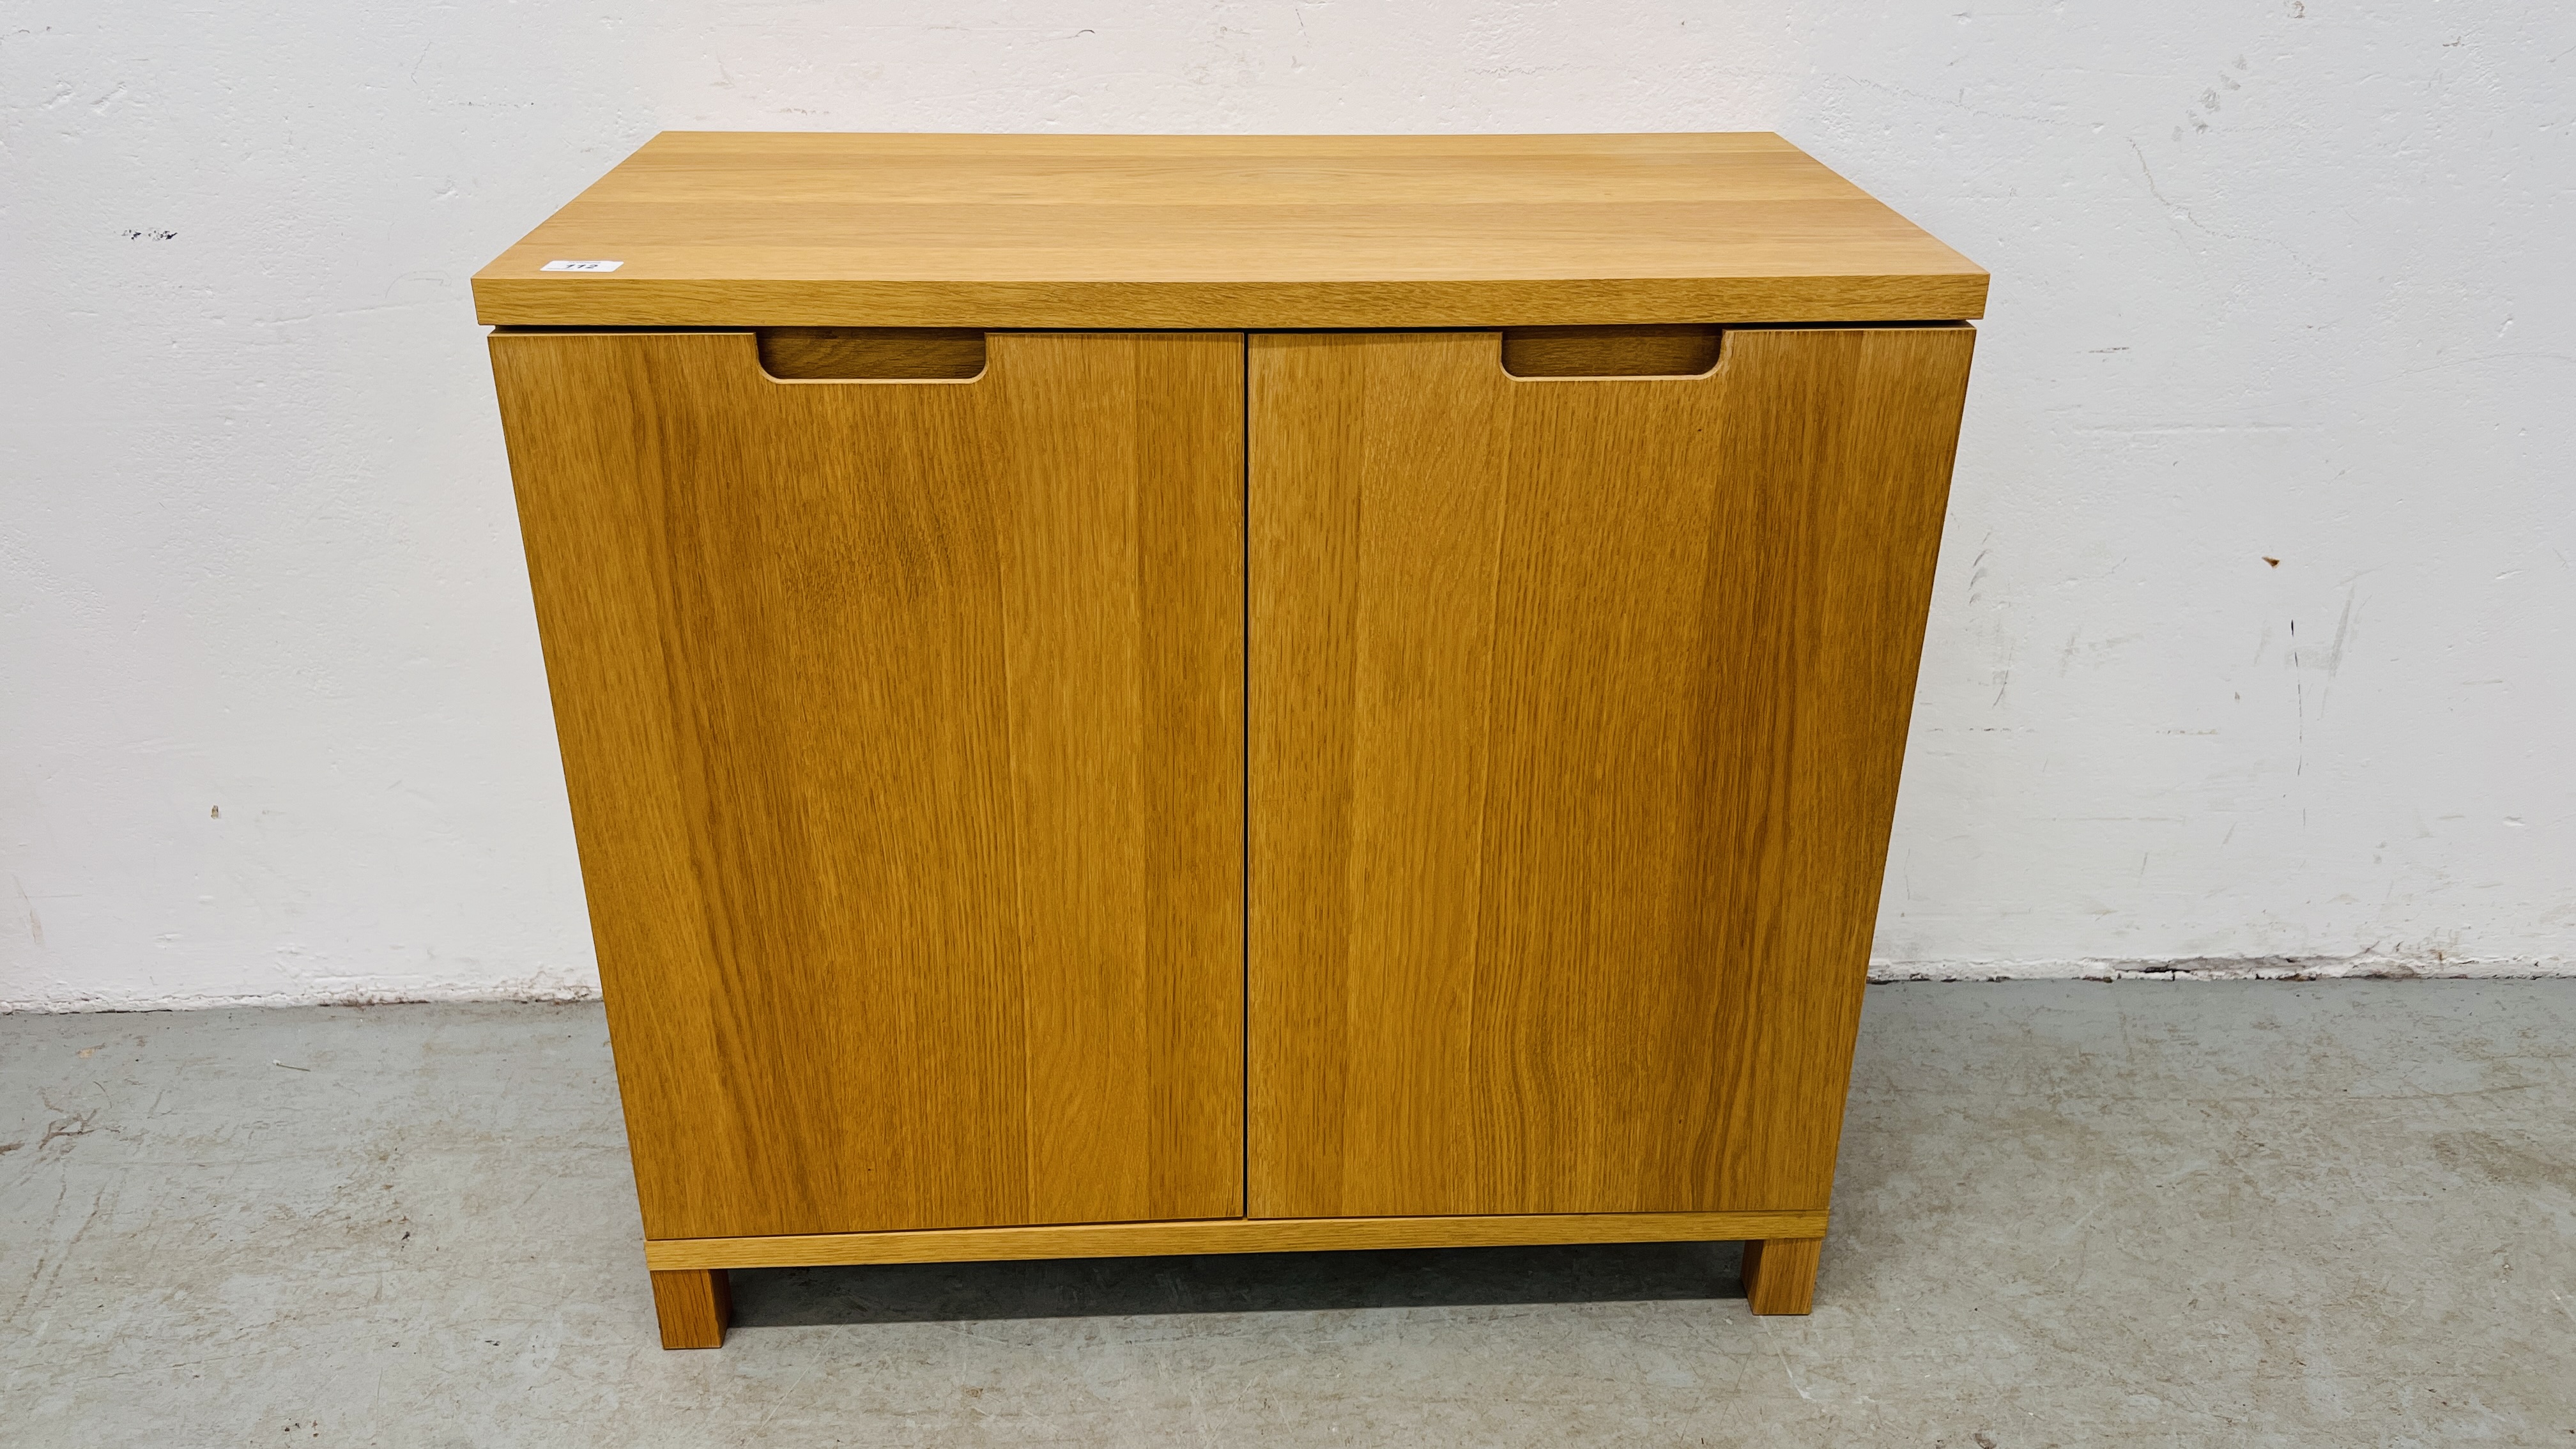 A MODERN LIGHT OAK FINISH TWO DOOR CABINET WITH SHELVED INTERIOR.